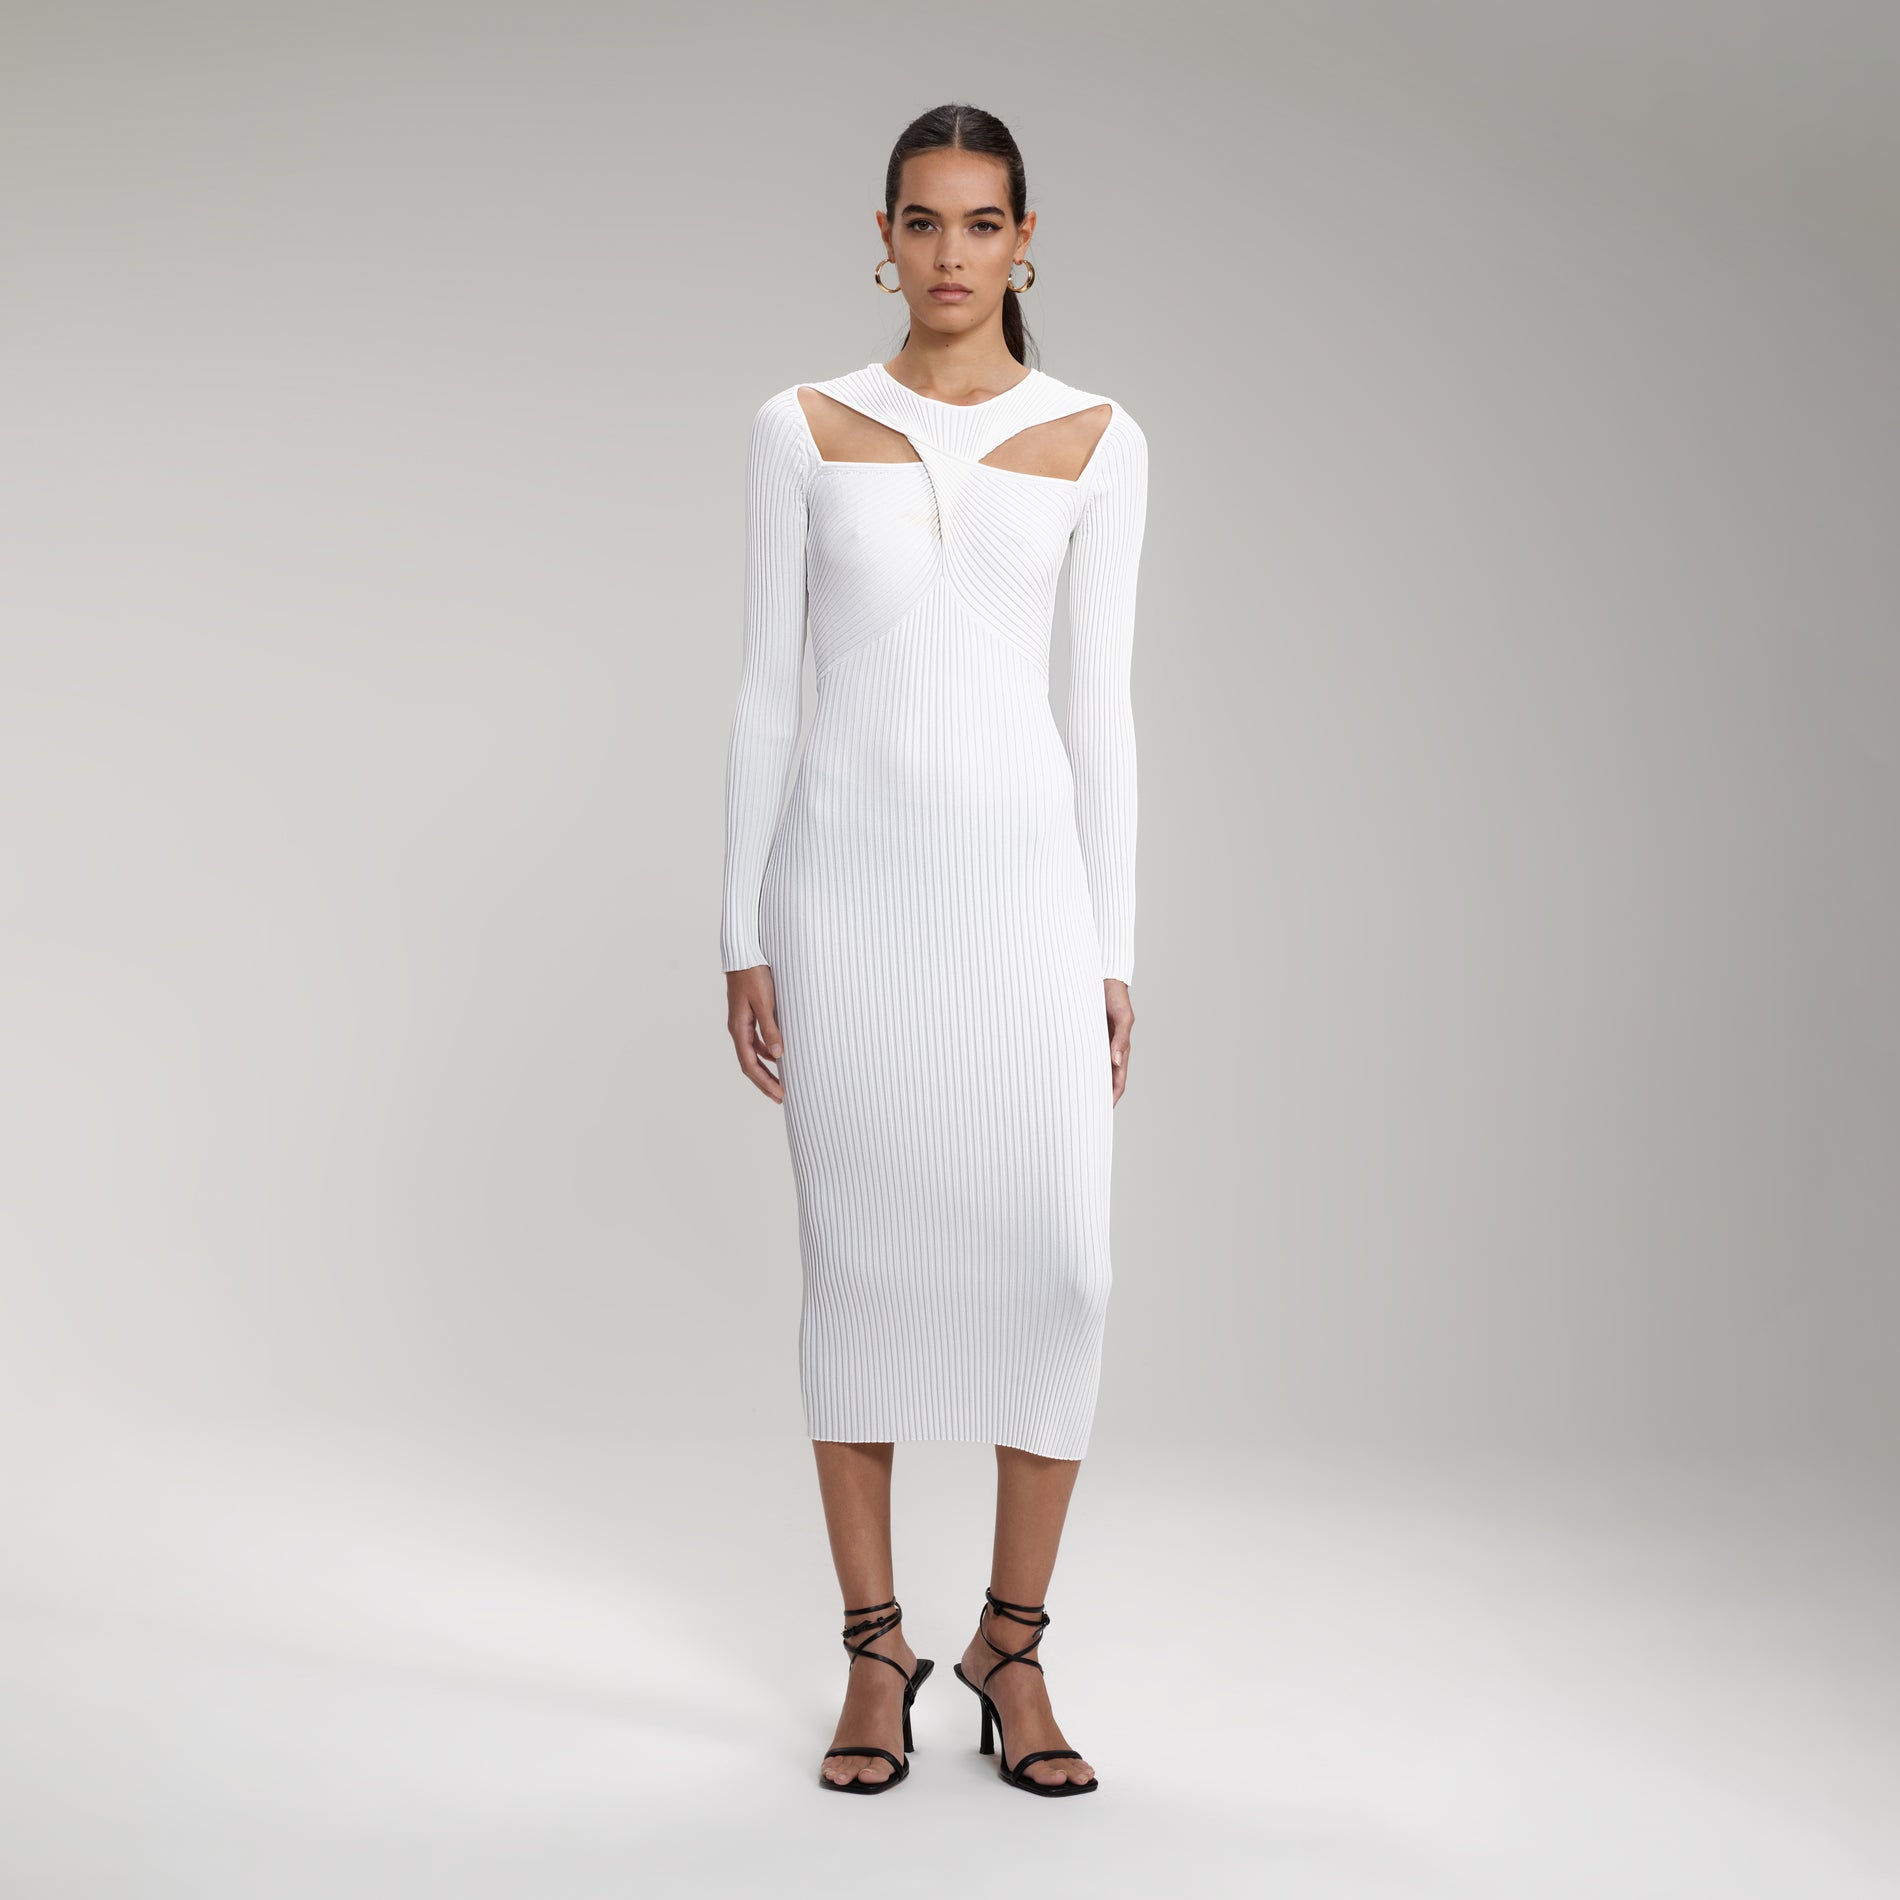 A woman wearing the White Ribbed Knit Cut Out Midi Dress